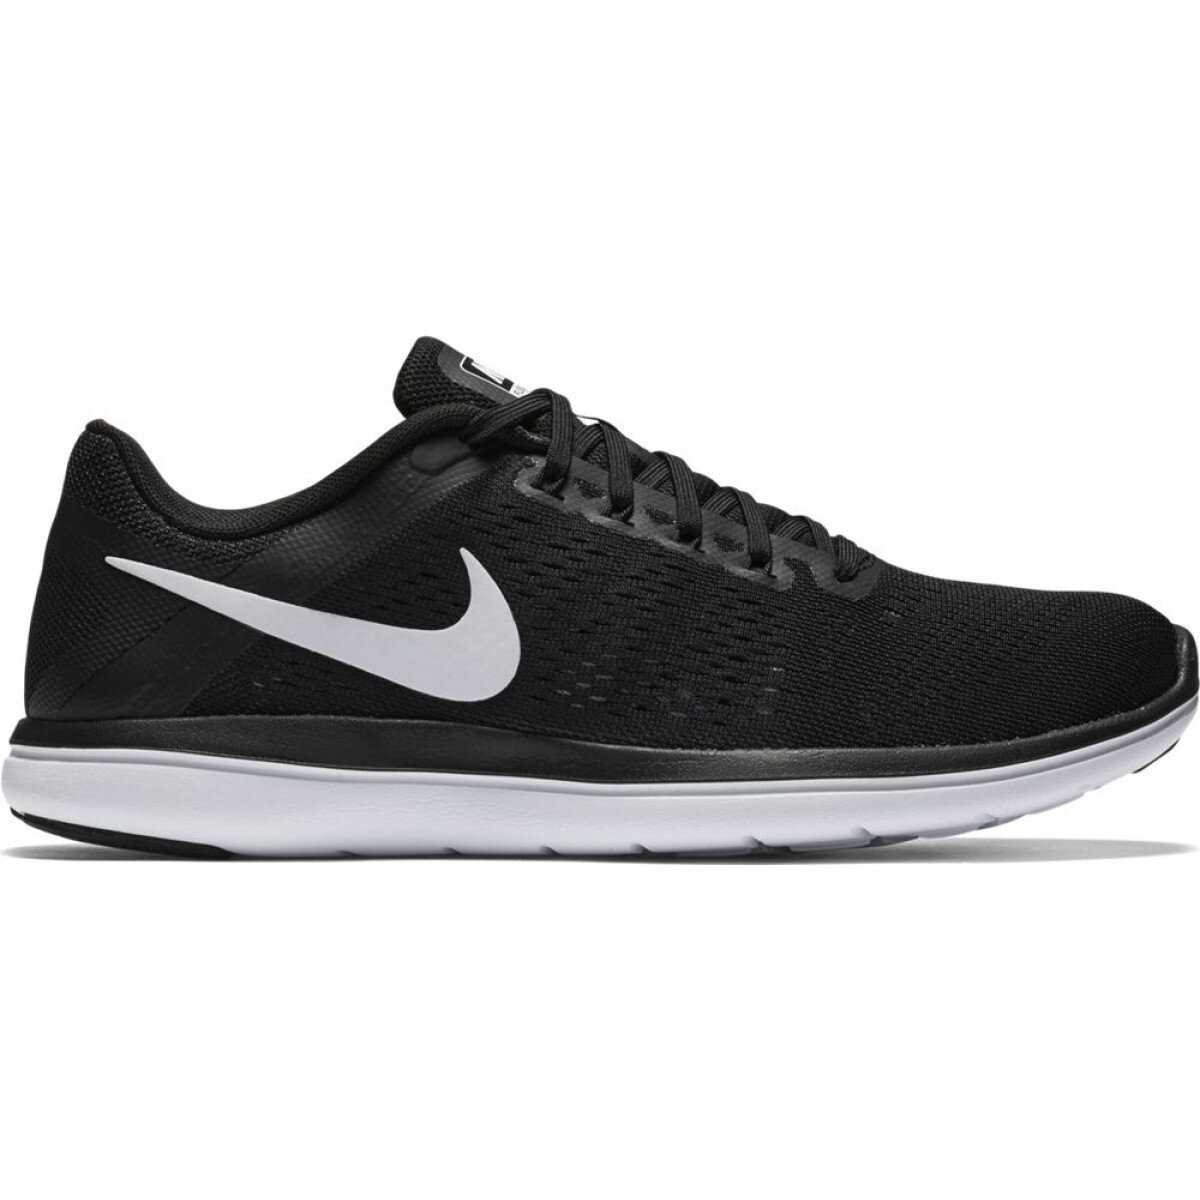 Available Bloodstained declare Nike Flex 2016 RN Women's Running Shoes in Black — UFO No More